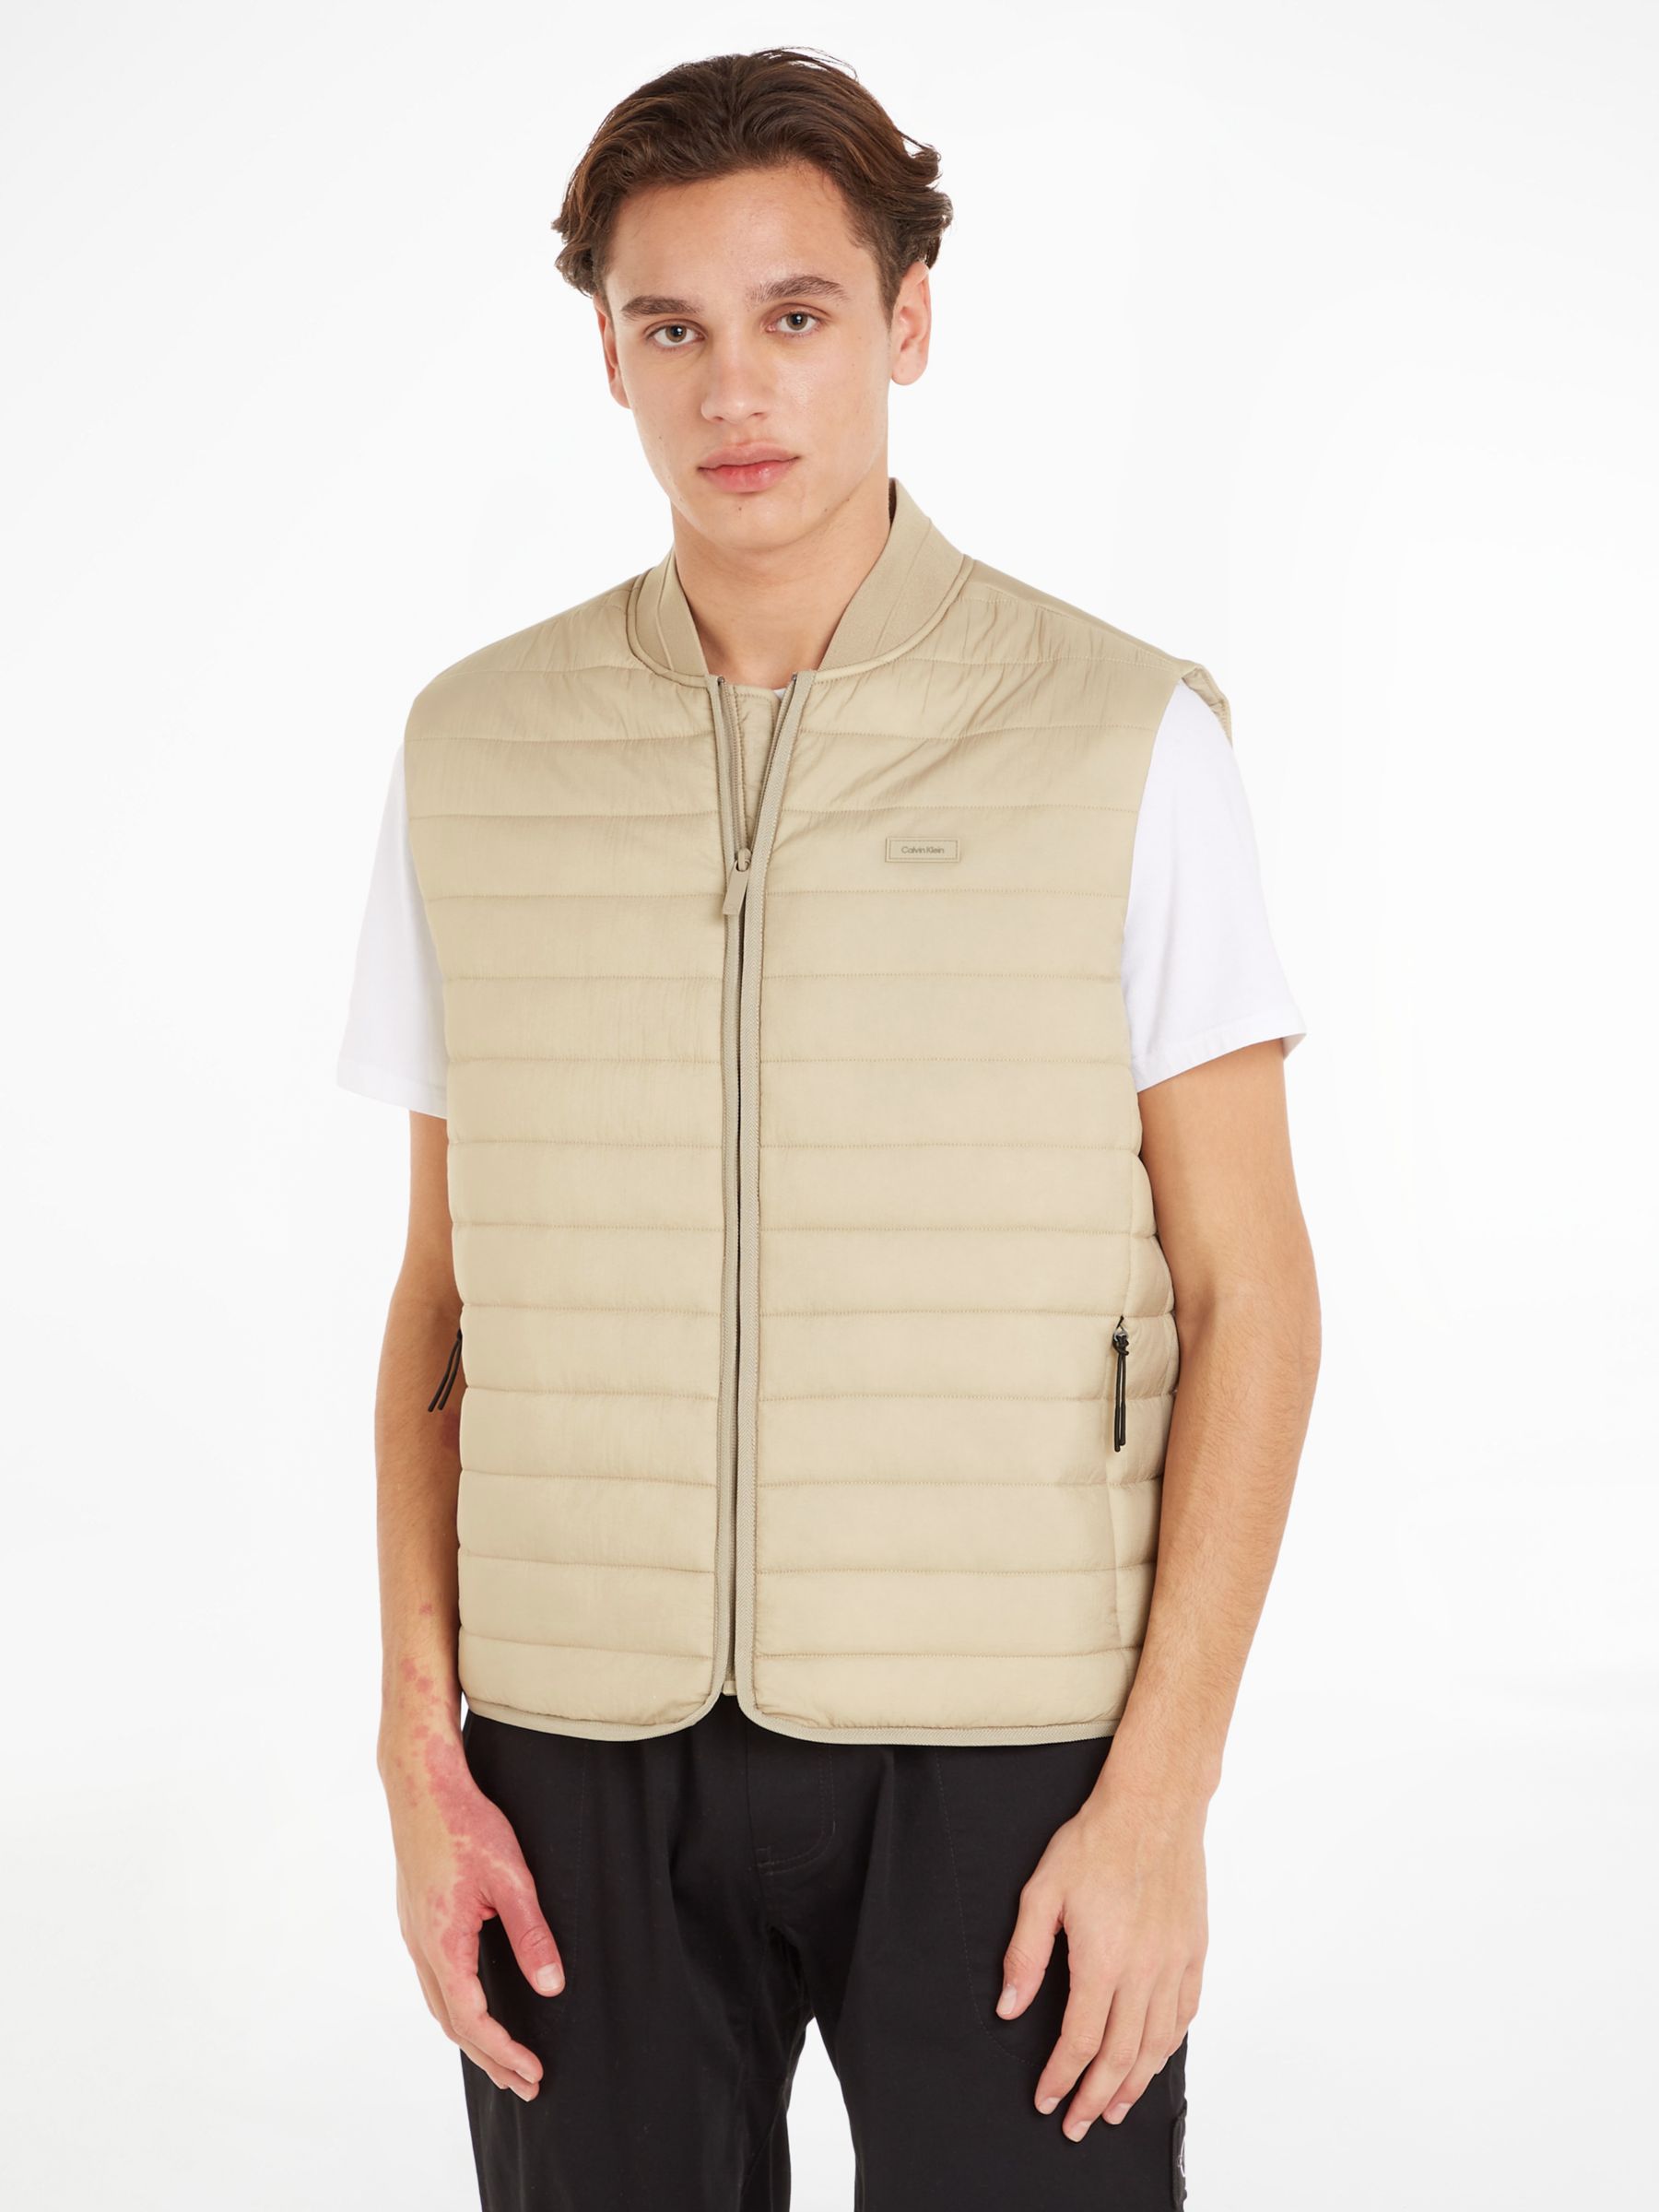 & Gilet, Crinkle Calvin Quilted Partners Klein at Lewis Clay John